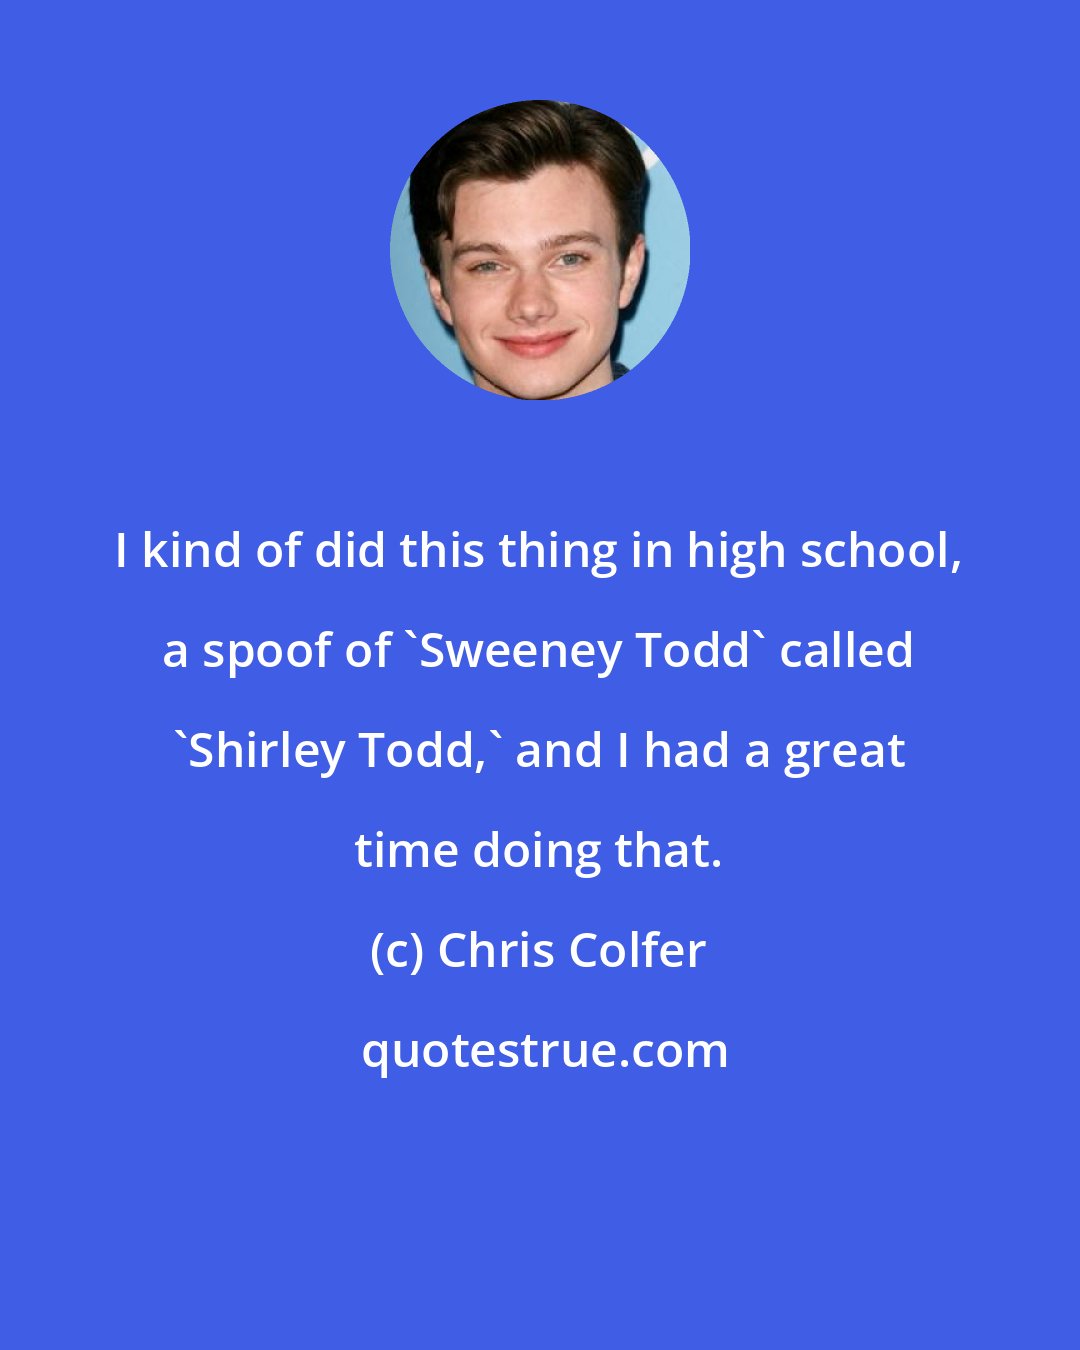 Chris Colfer: I kind of did this thing in high school, a spoof of 'Sweeney Todd' called 'Shirley Todd,' and I had a great time doing that.